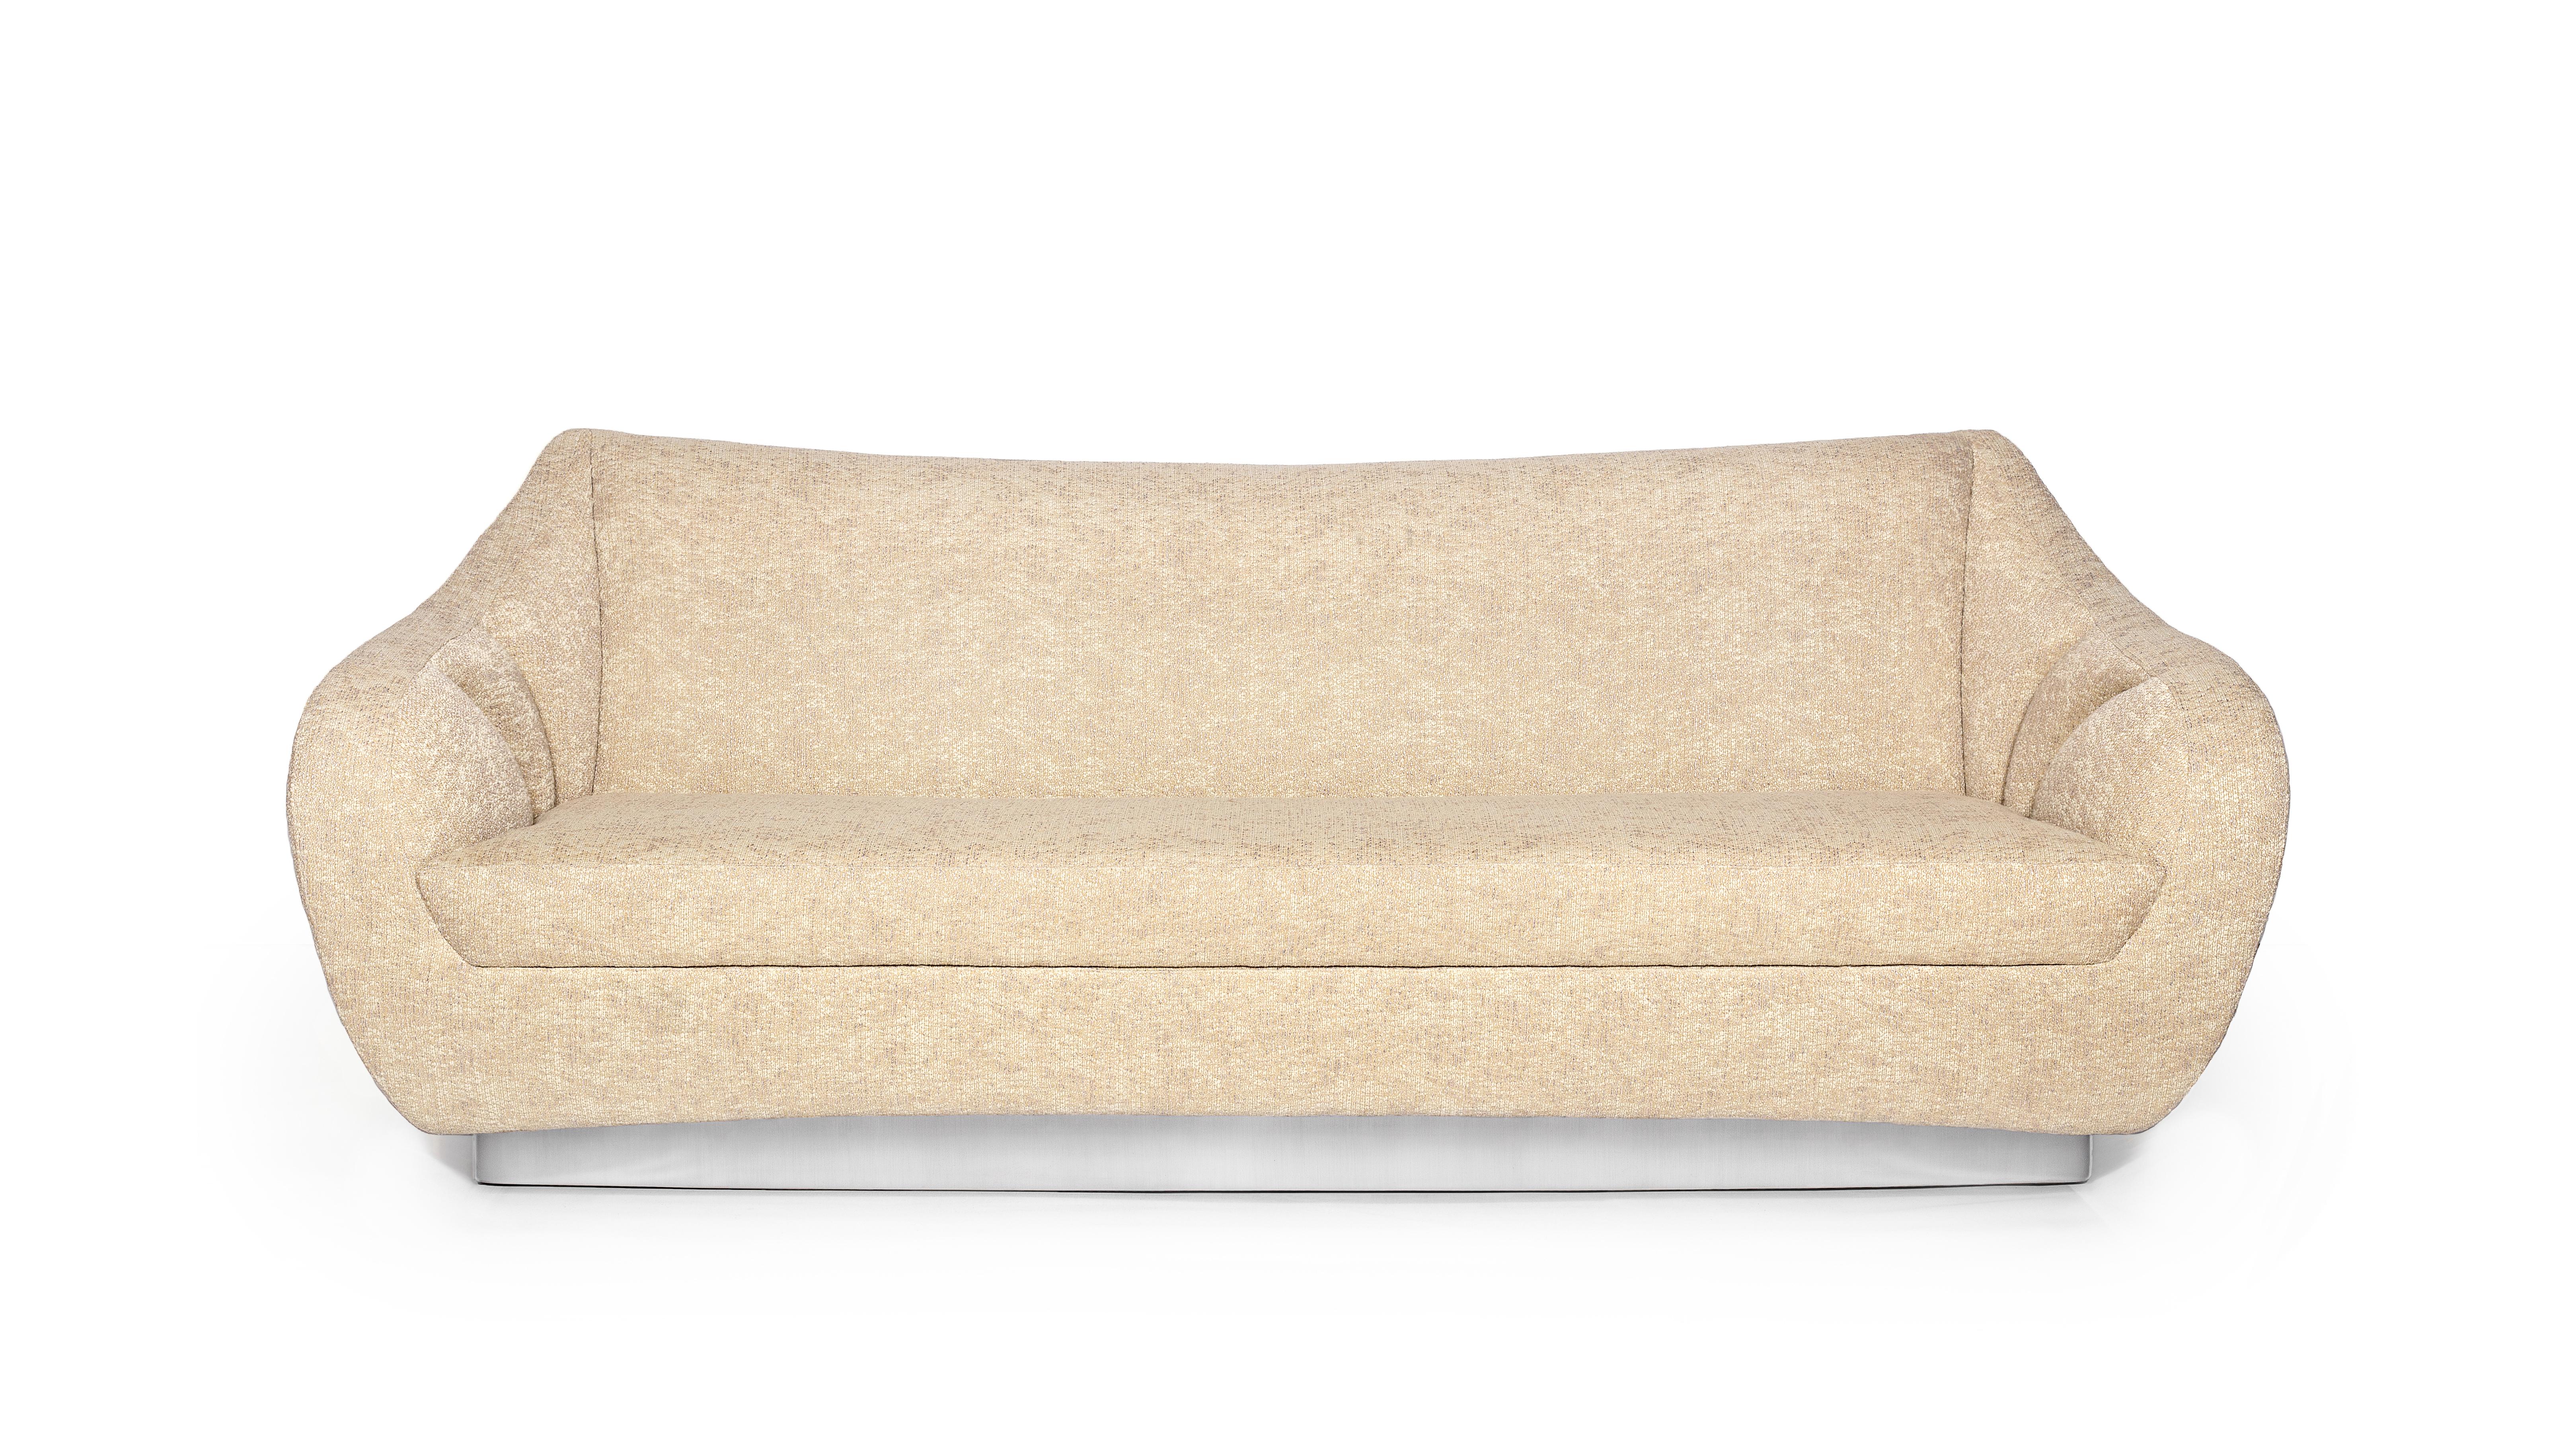 Figueroa 3 Seat Sofa by InsidherLand
Dimensions: D 90 x W 230 x H 90 cm.
Materials: Brushed stainless steel, InsidherLand Blend Ref. 5 fabric.
95 kg.
Available in different fabrics.

Located in the sunny California on the south-west of the United